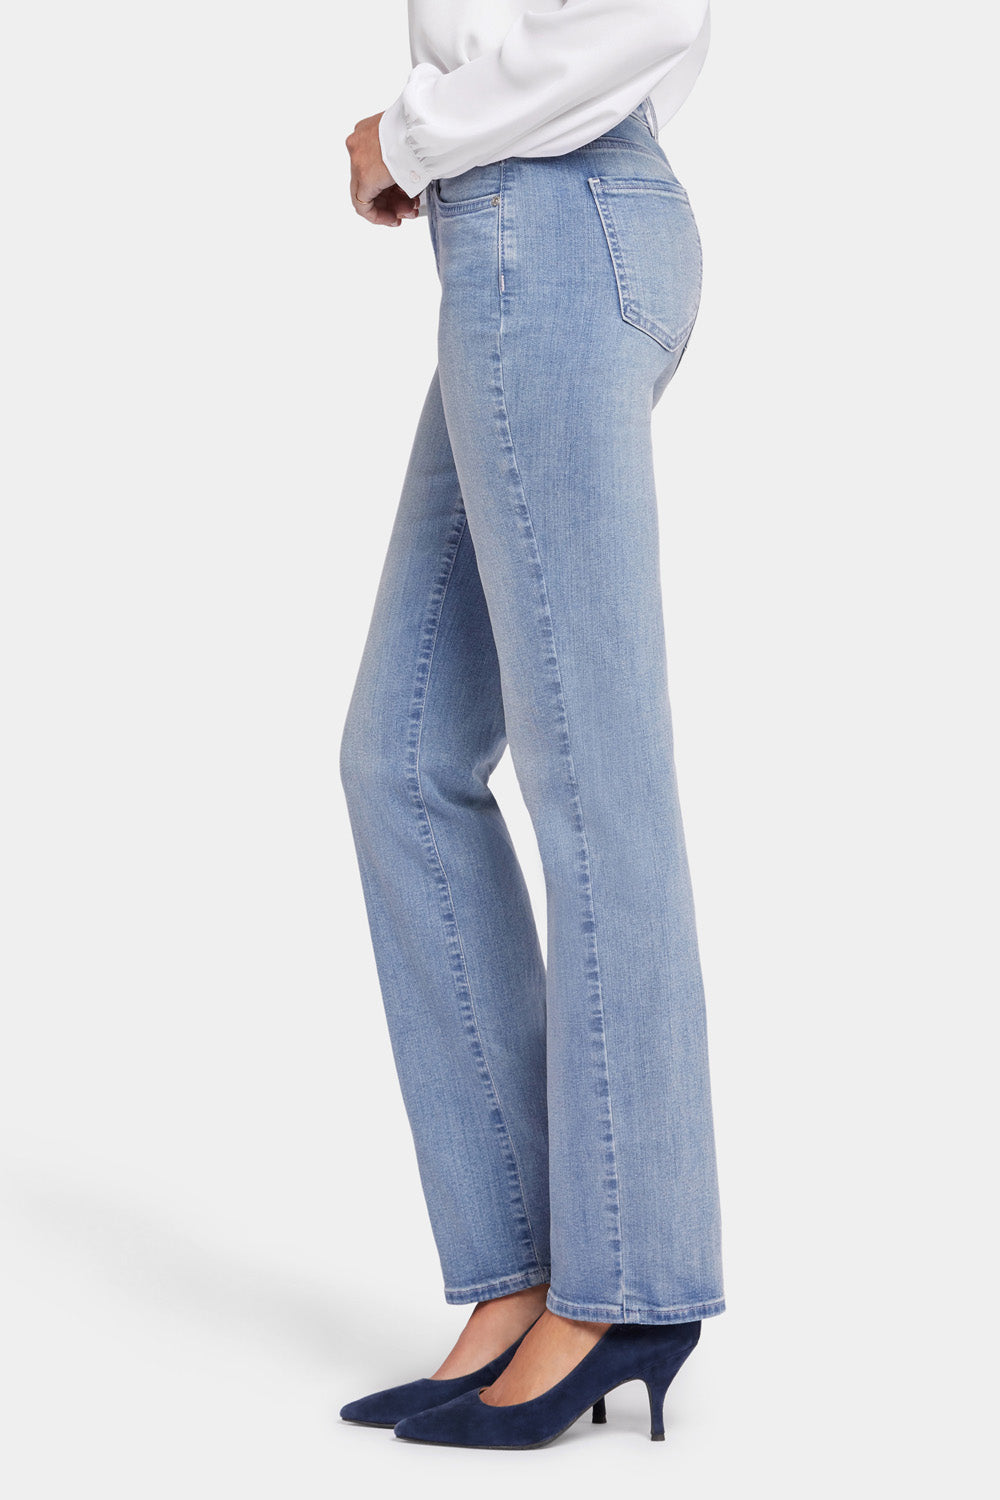 Marilyn Straight Jeans In Petite - Thistle Falls Blue | NYDJ